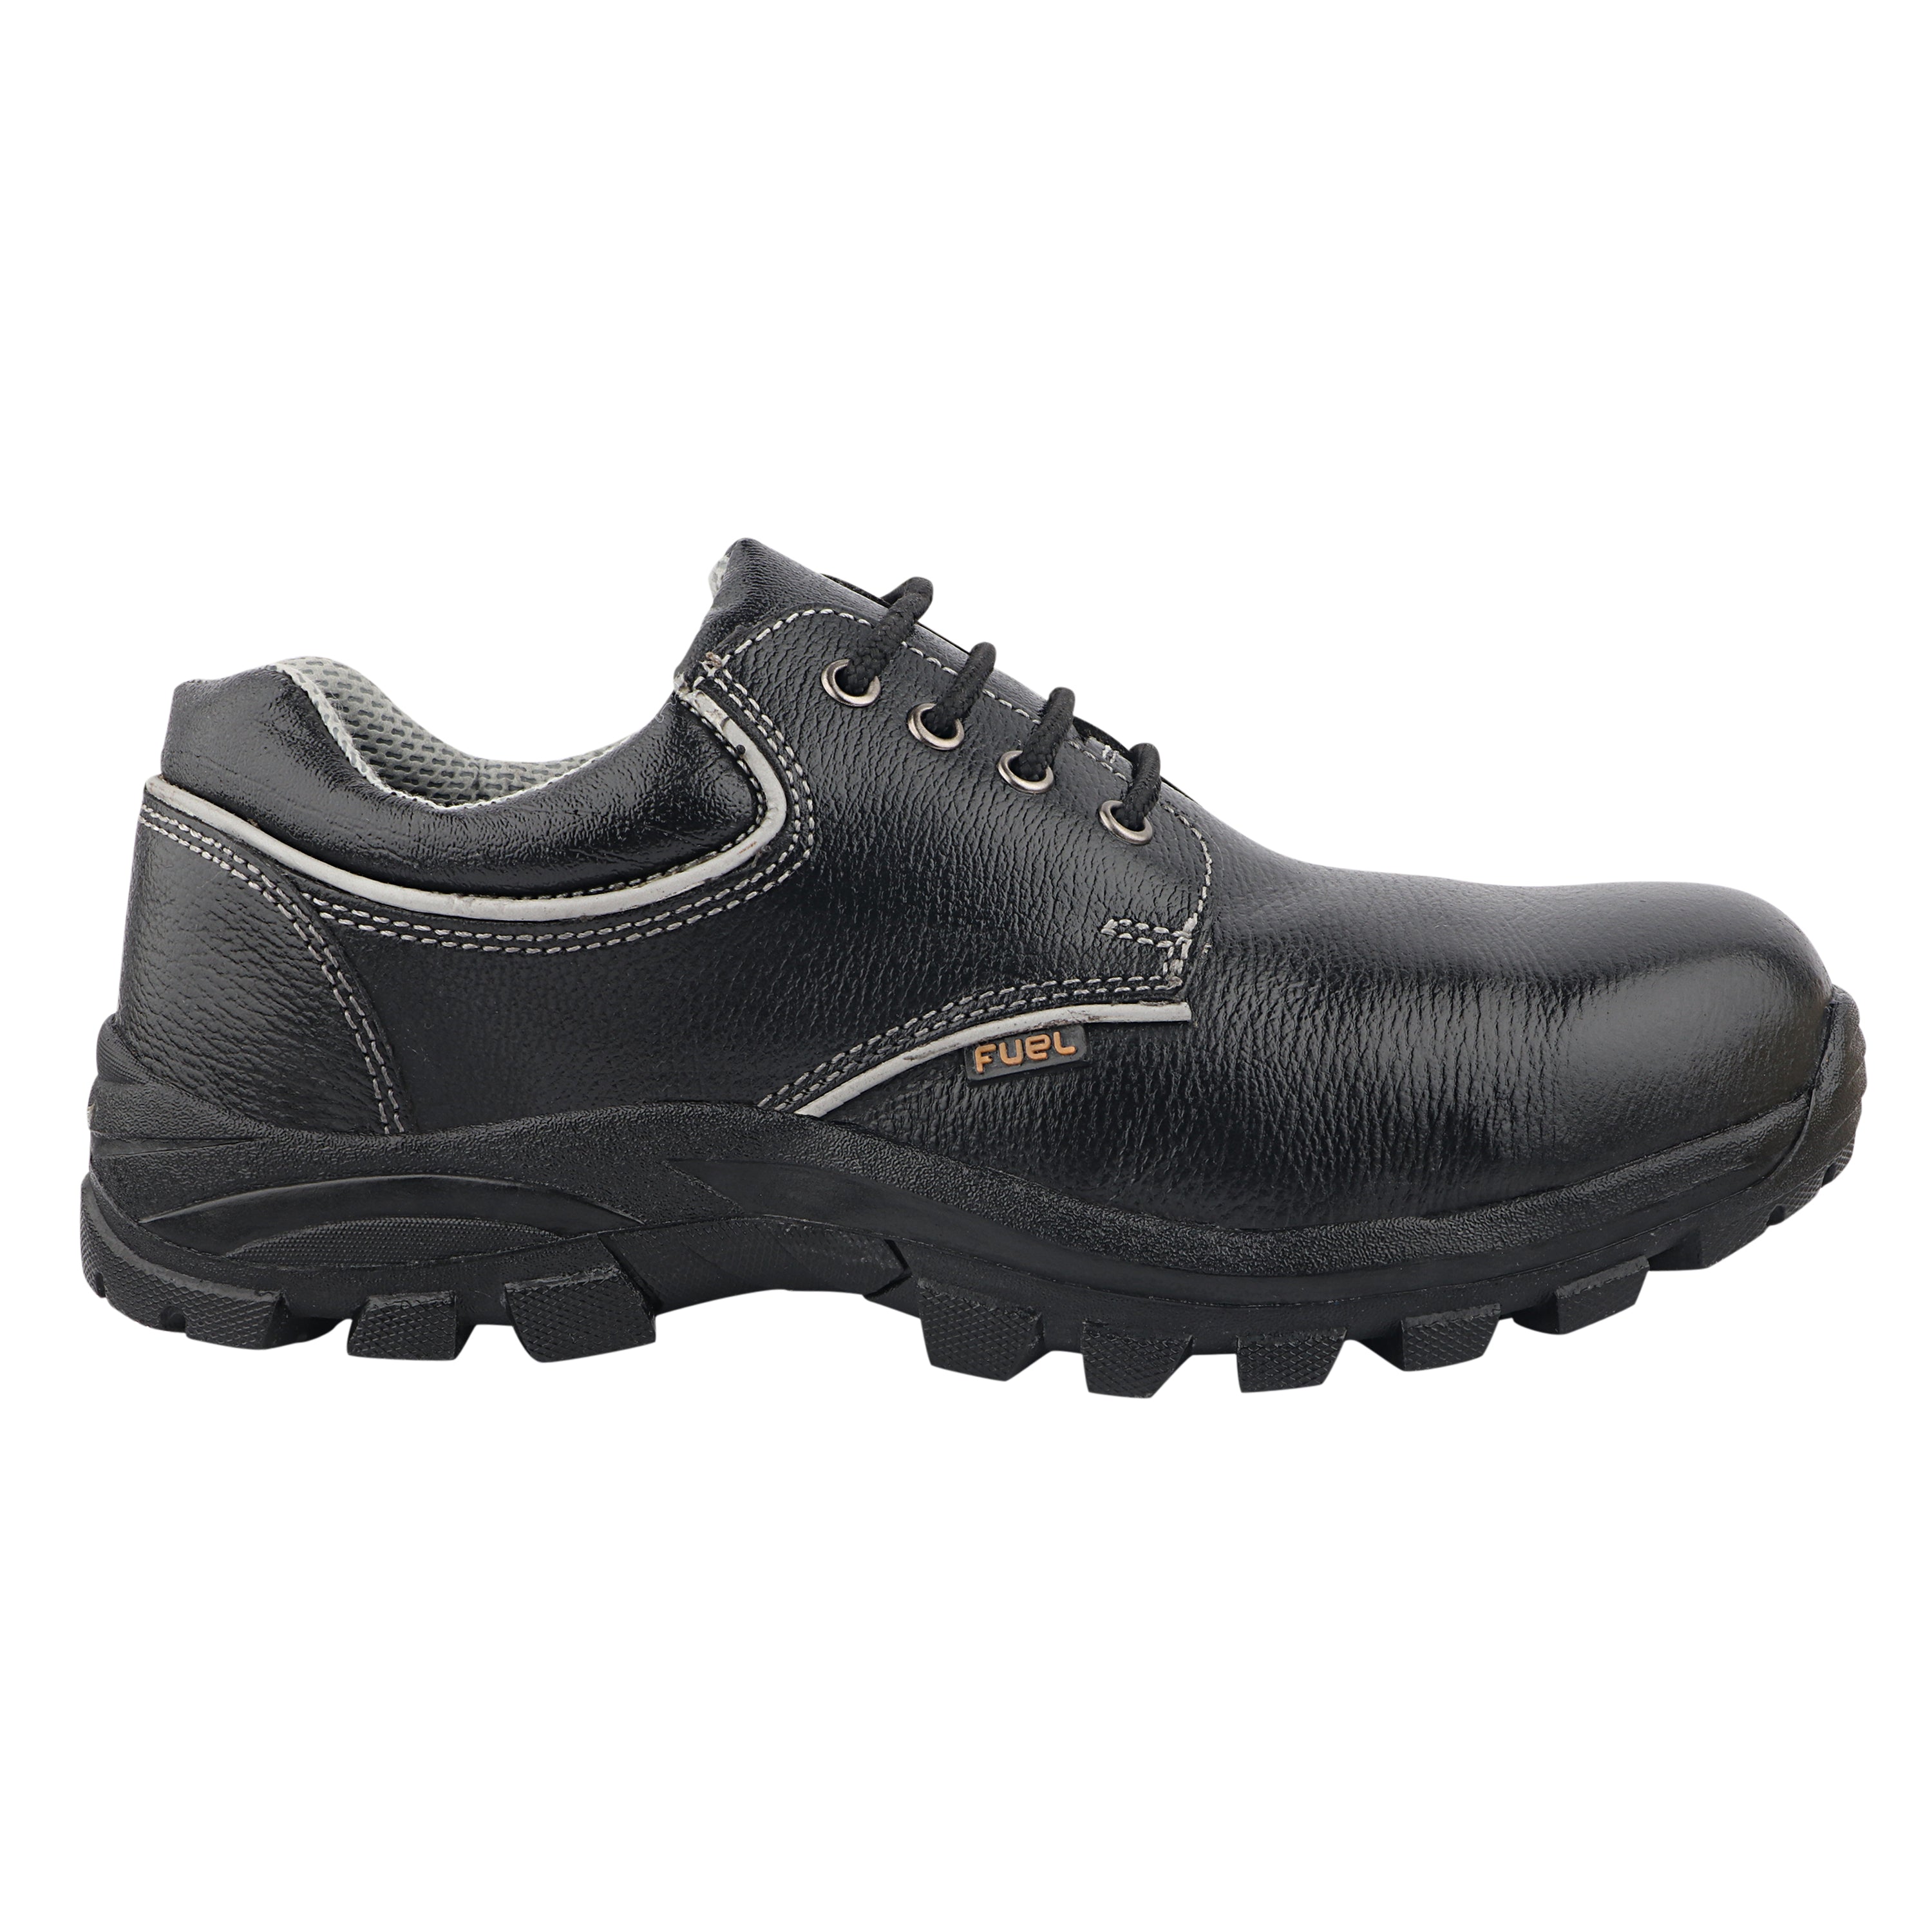 Fuel Leon R Genuine Leather Safety Shoes for Men's Steel Toe Cap With Single Density Rubber Sole (Black)